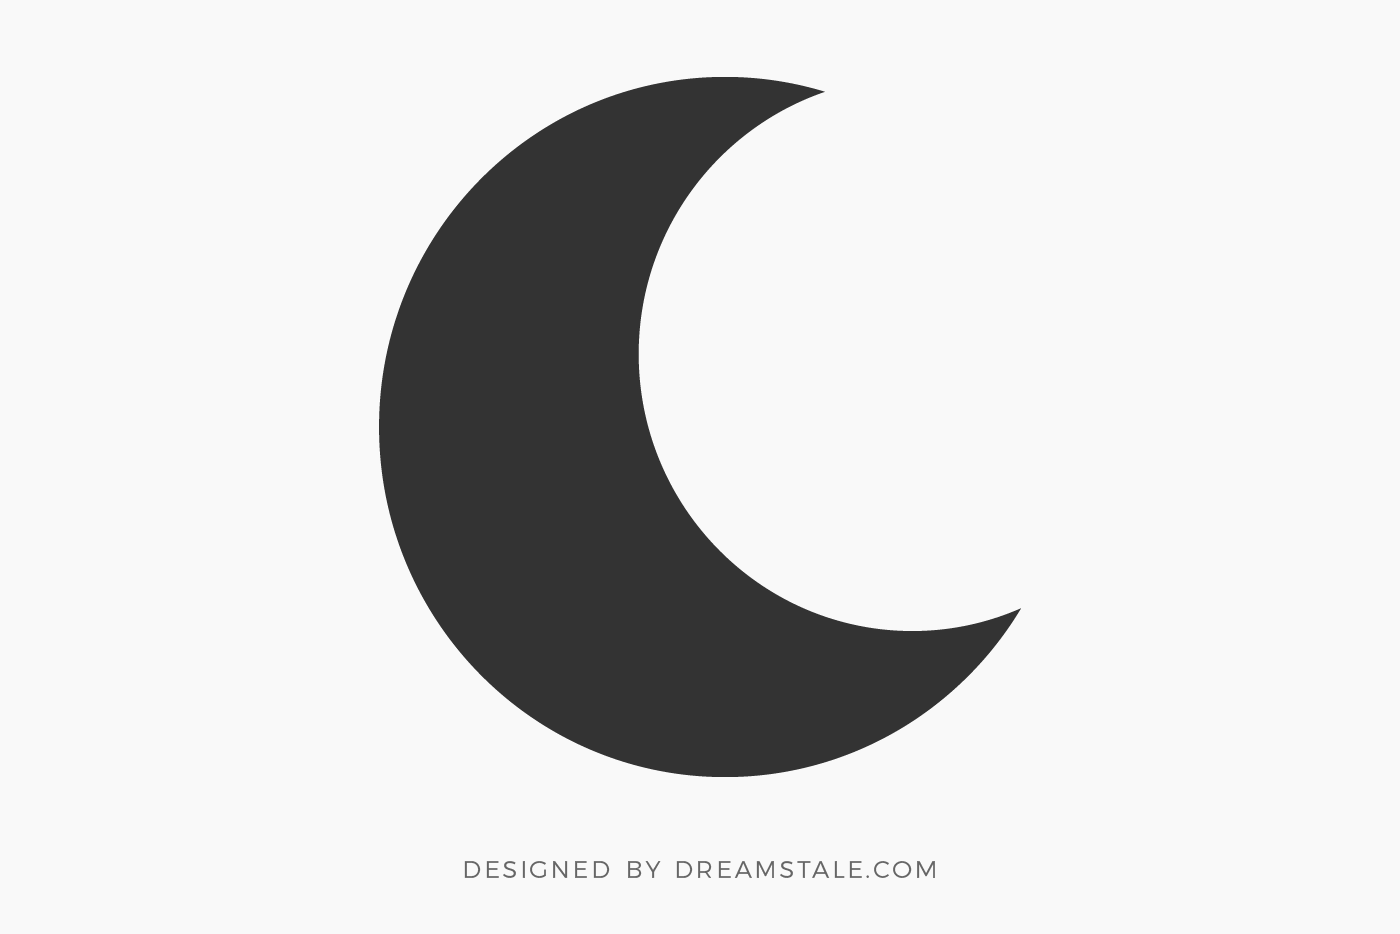 Crescent Moon Svg Png Icon Free Download (#39469) - OnlineWebFonts